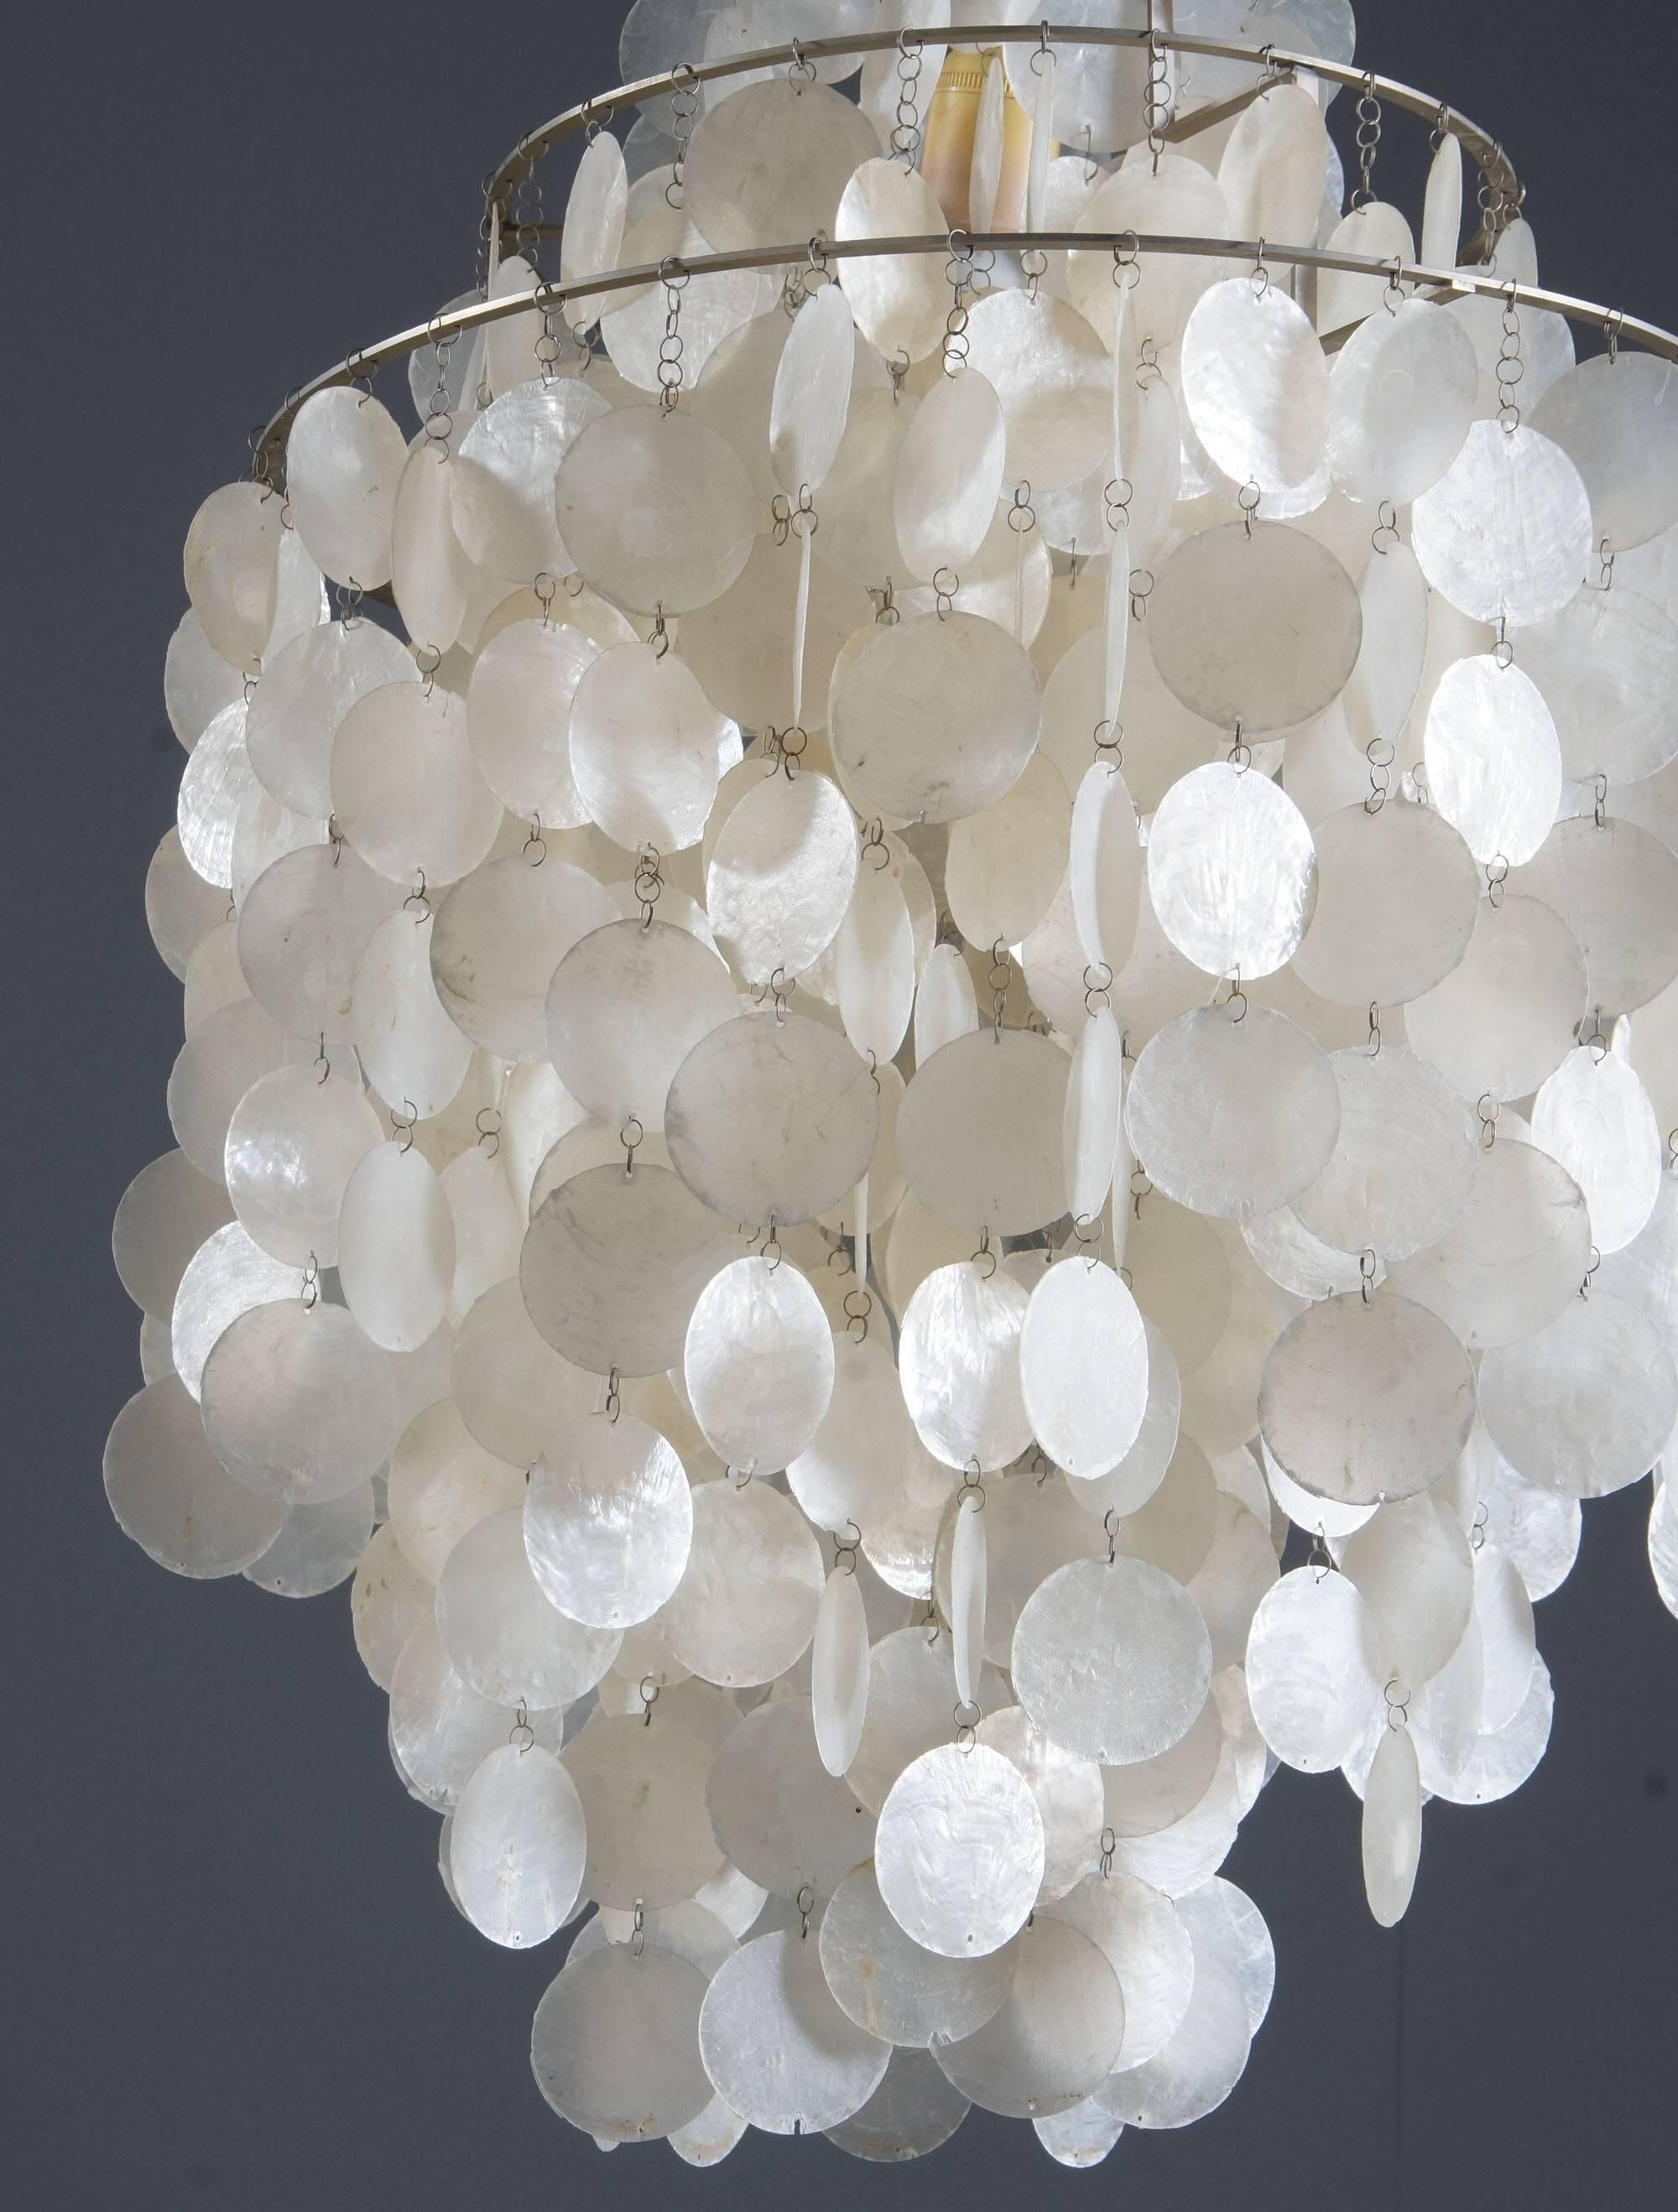 Original 1964 thin capize shell chandelier designed by Verner Panton for Luber, Switzerland.